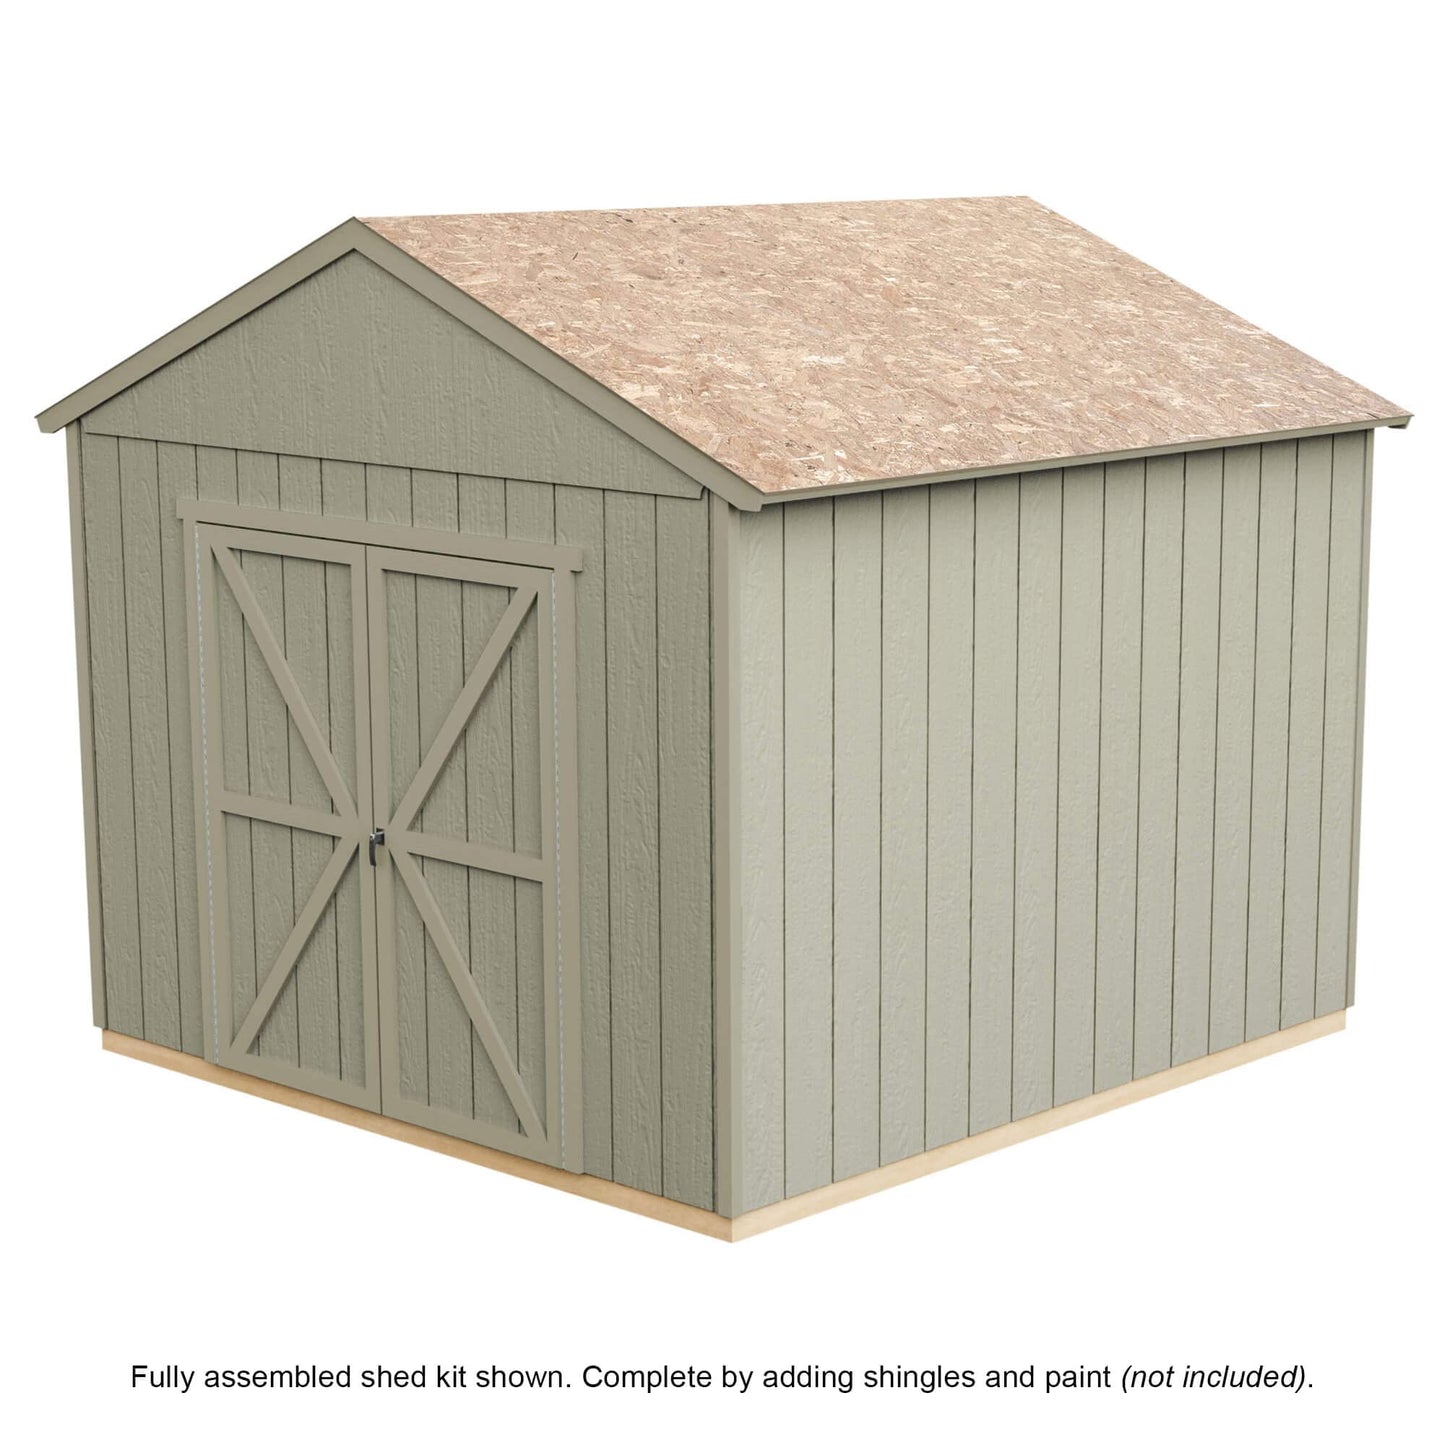 Handy Home Products Astoria 12x12 Do-It-Yourself Wooden Storage Shed Brown Without Floor